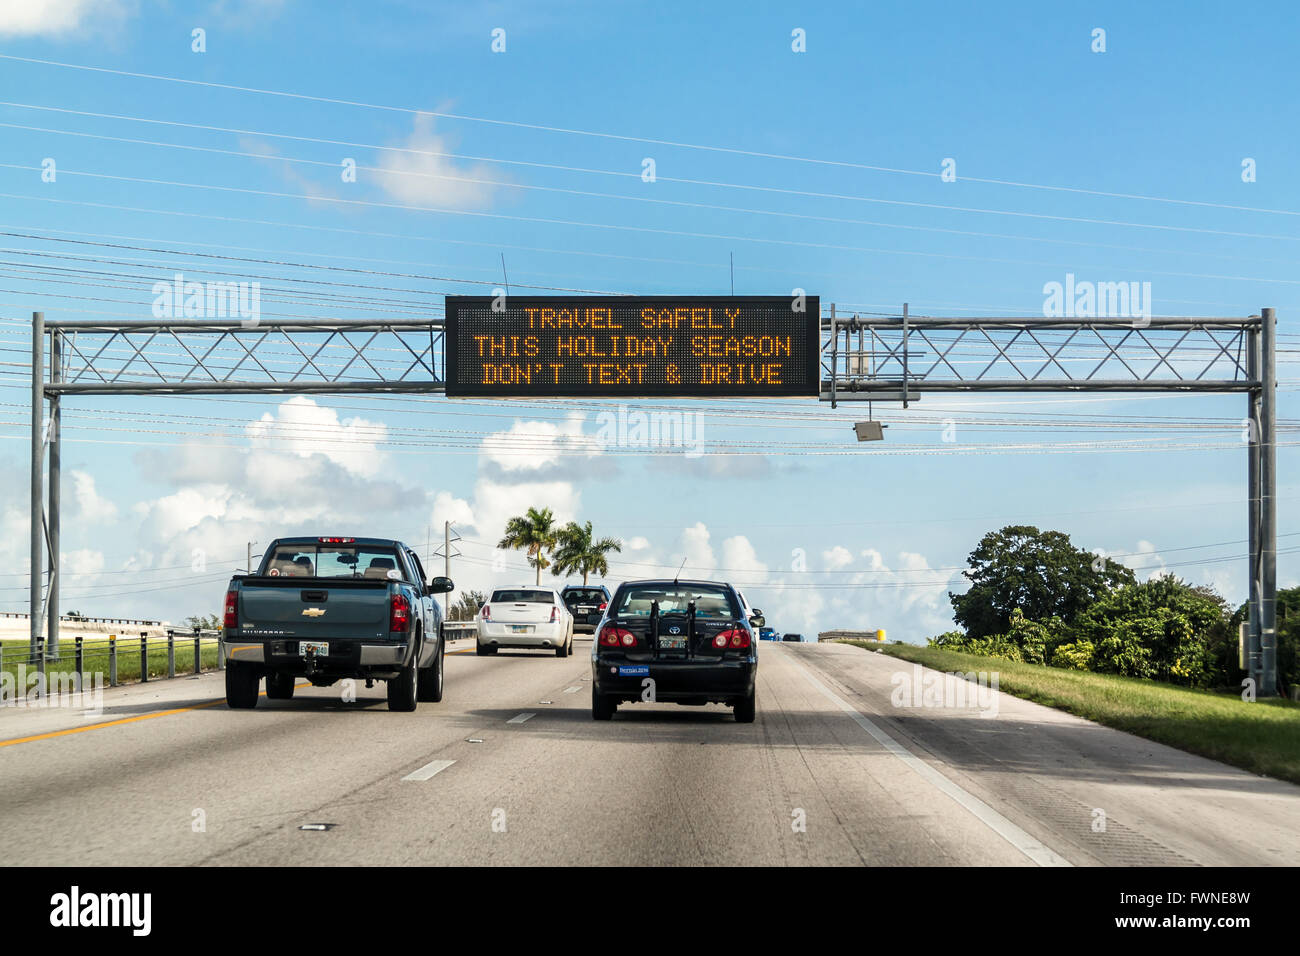 Electronic variable message board on matrix billboard on highway in Florida warning drivers not to text and drive, United States Stock Photo